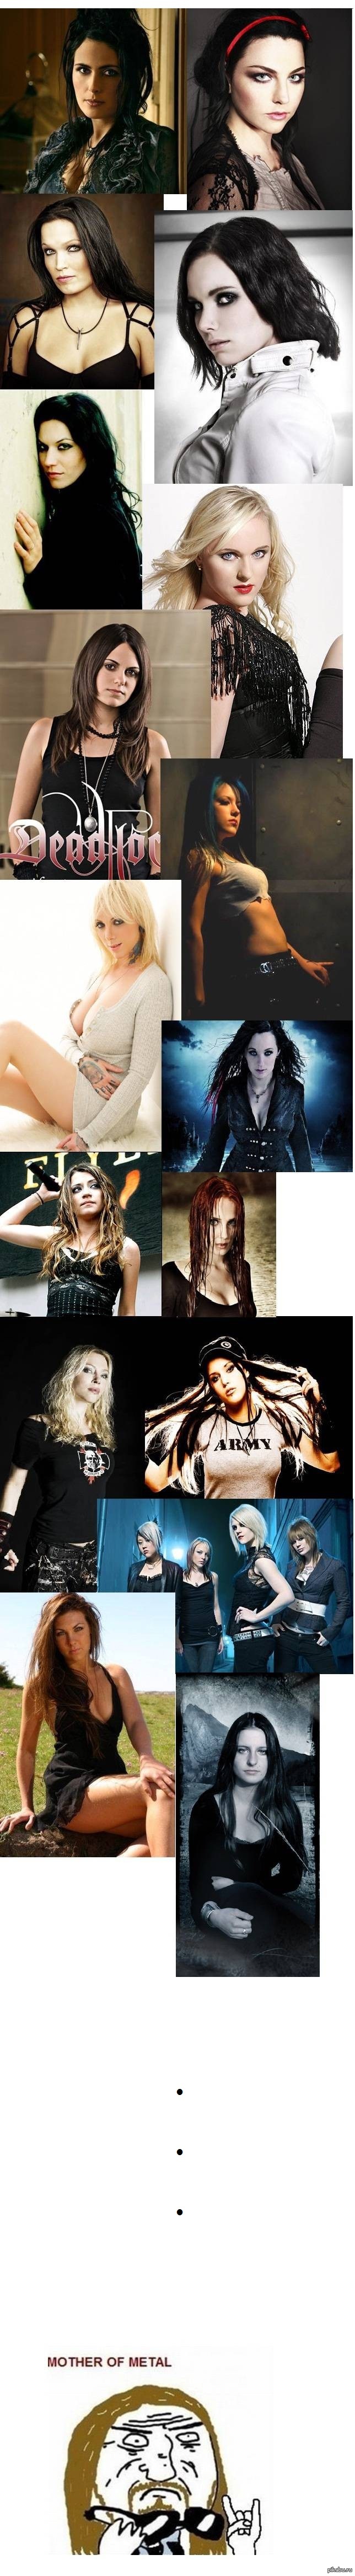 Another reason to listen to metal! - My, Girls, Metal, Music, Group